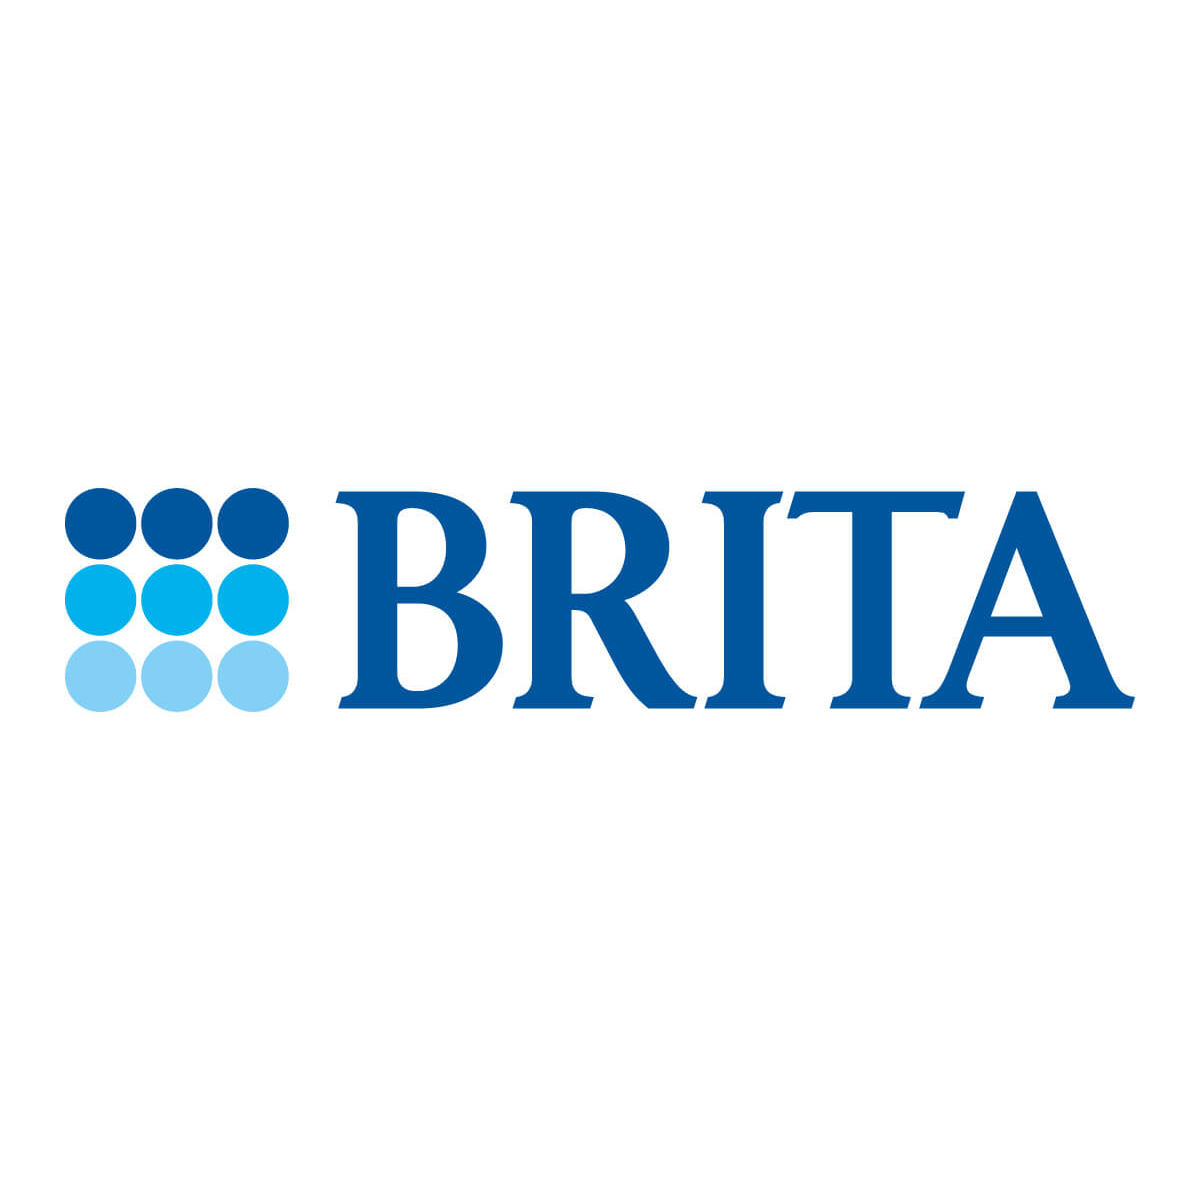 Know more about BRITA │BRITA Water Filters and Water Purifiers